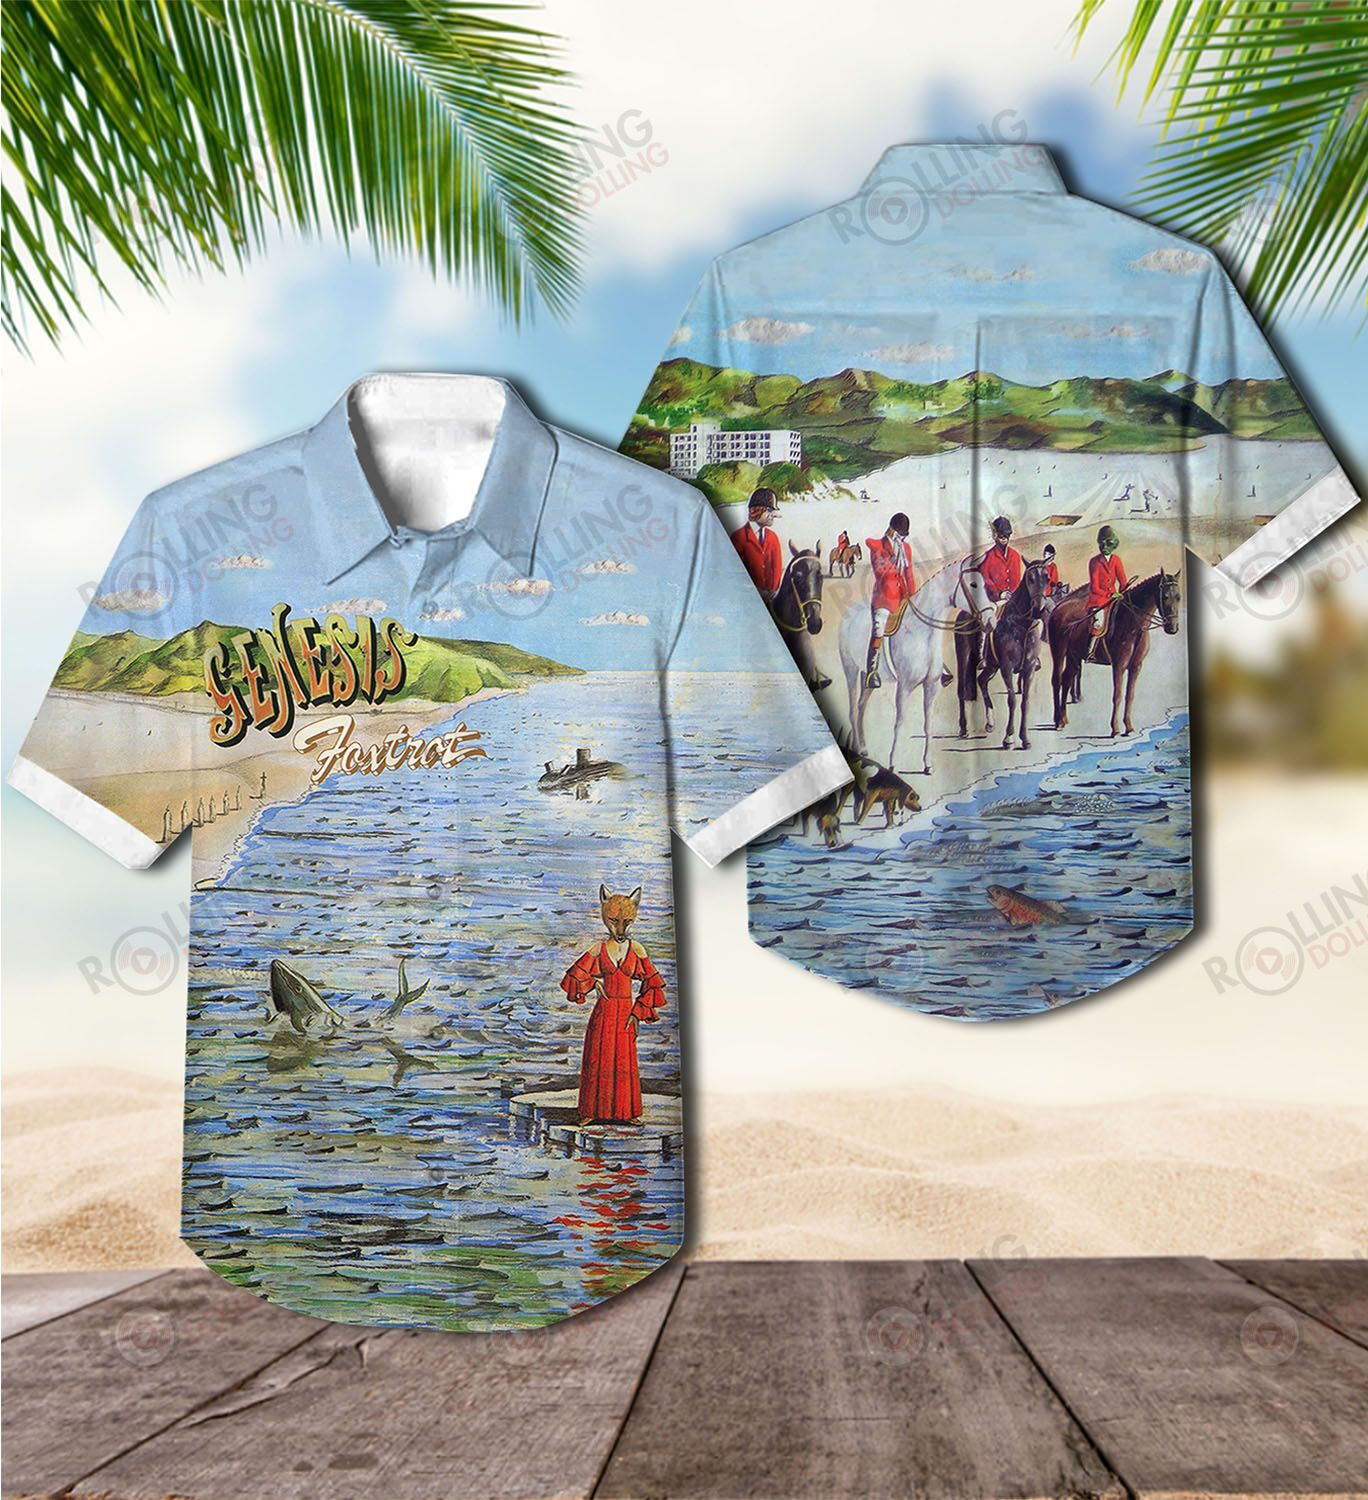 For summer, consider wearing This Amazing Hawaiian Shirt shirt in our store 194